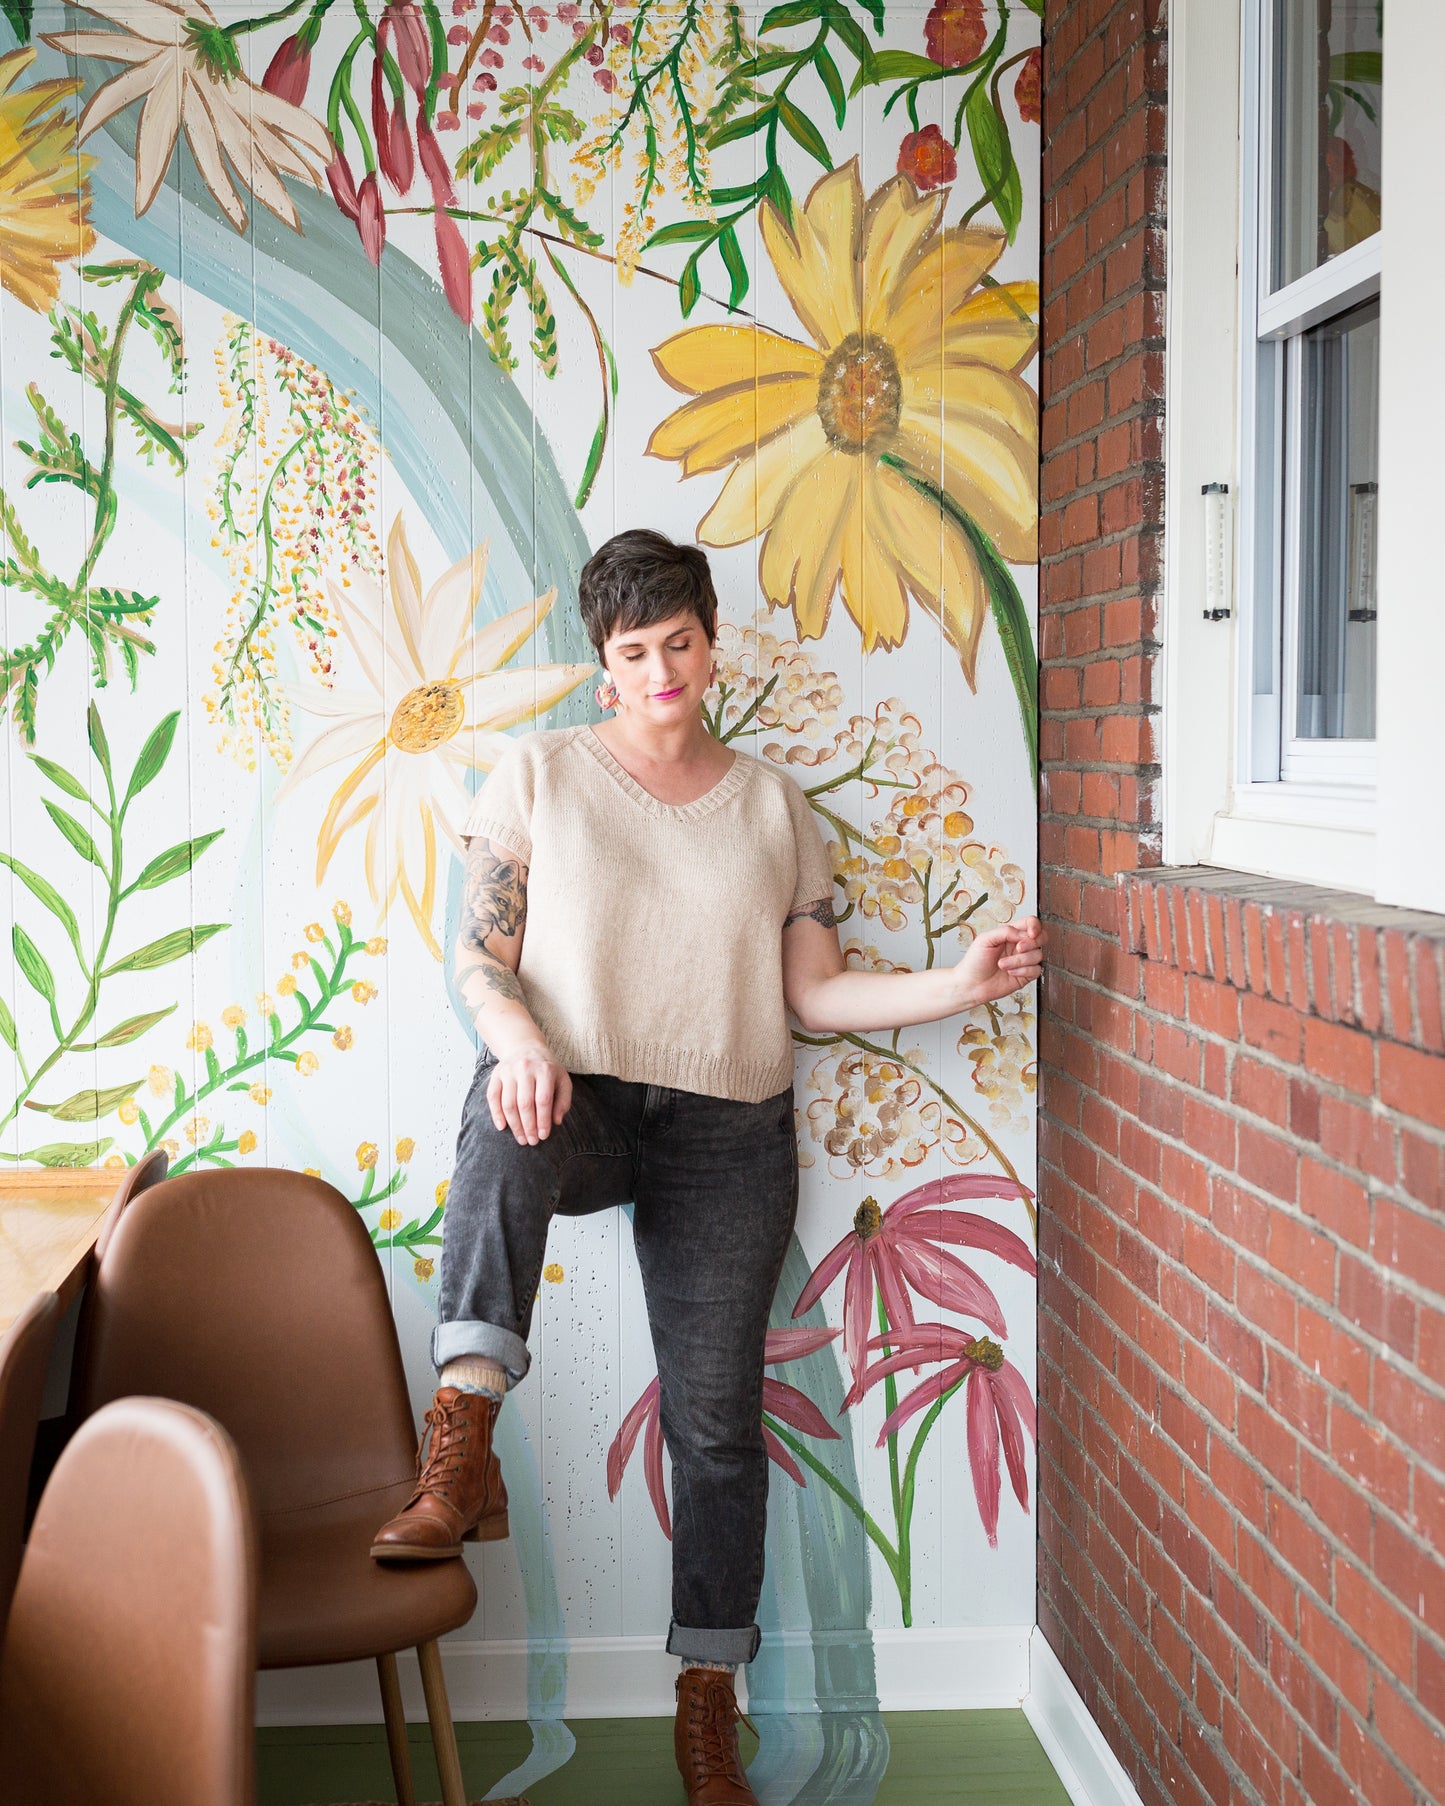 Jen stands, one foot up on a chair, looking down. She wears a light beige tee, knit with a V-neck, and gray jeans with brown boots. A floral wall mural can be seen in the background.